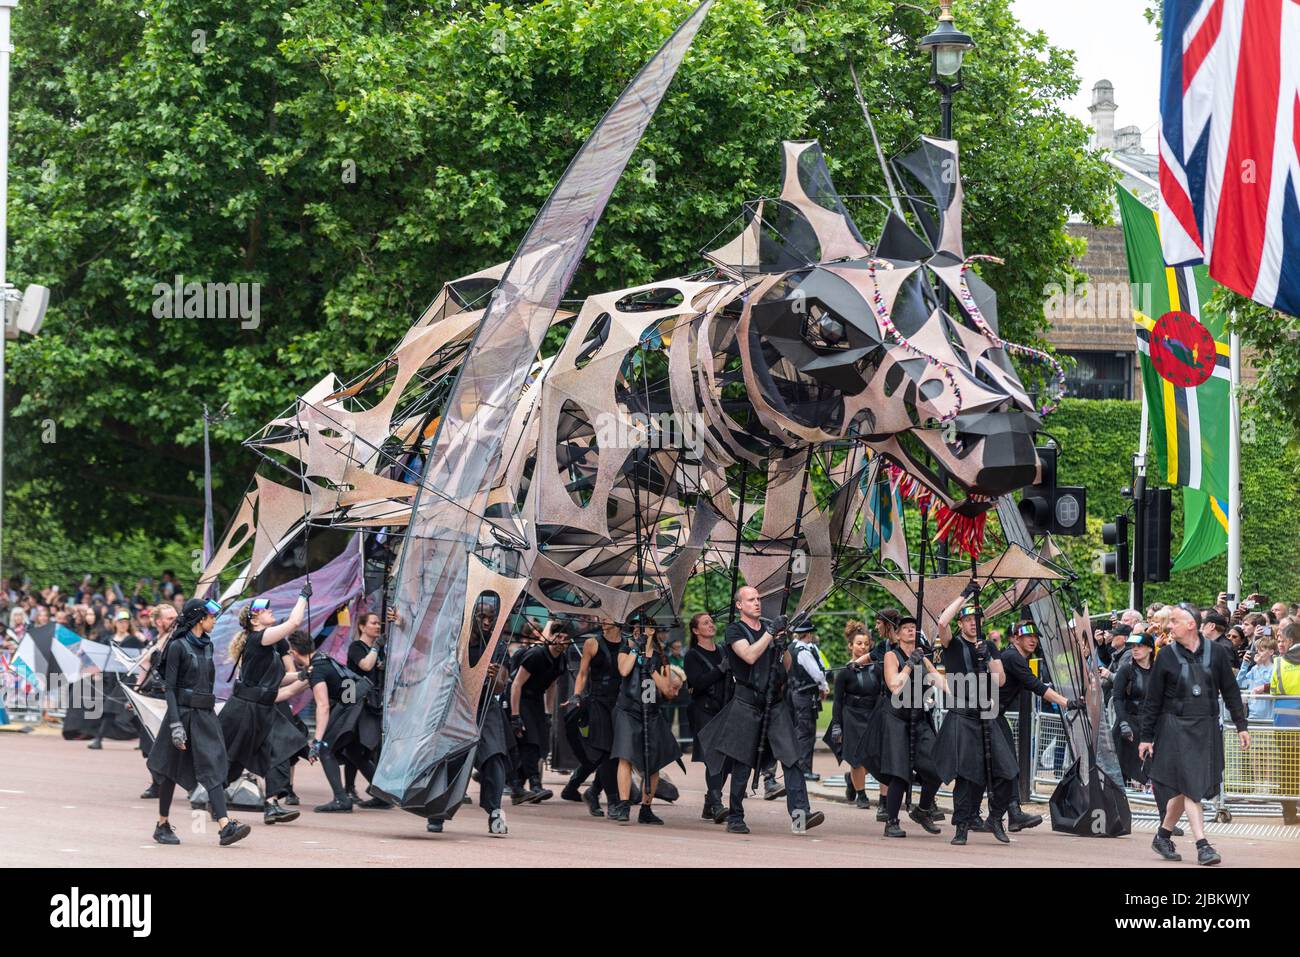 Large mechanical dragon puppet named The Hatchling at the Queen's Platinum Jubilee Pageant parade in The Mall, London, UK. Stock Photo